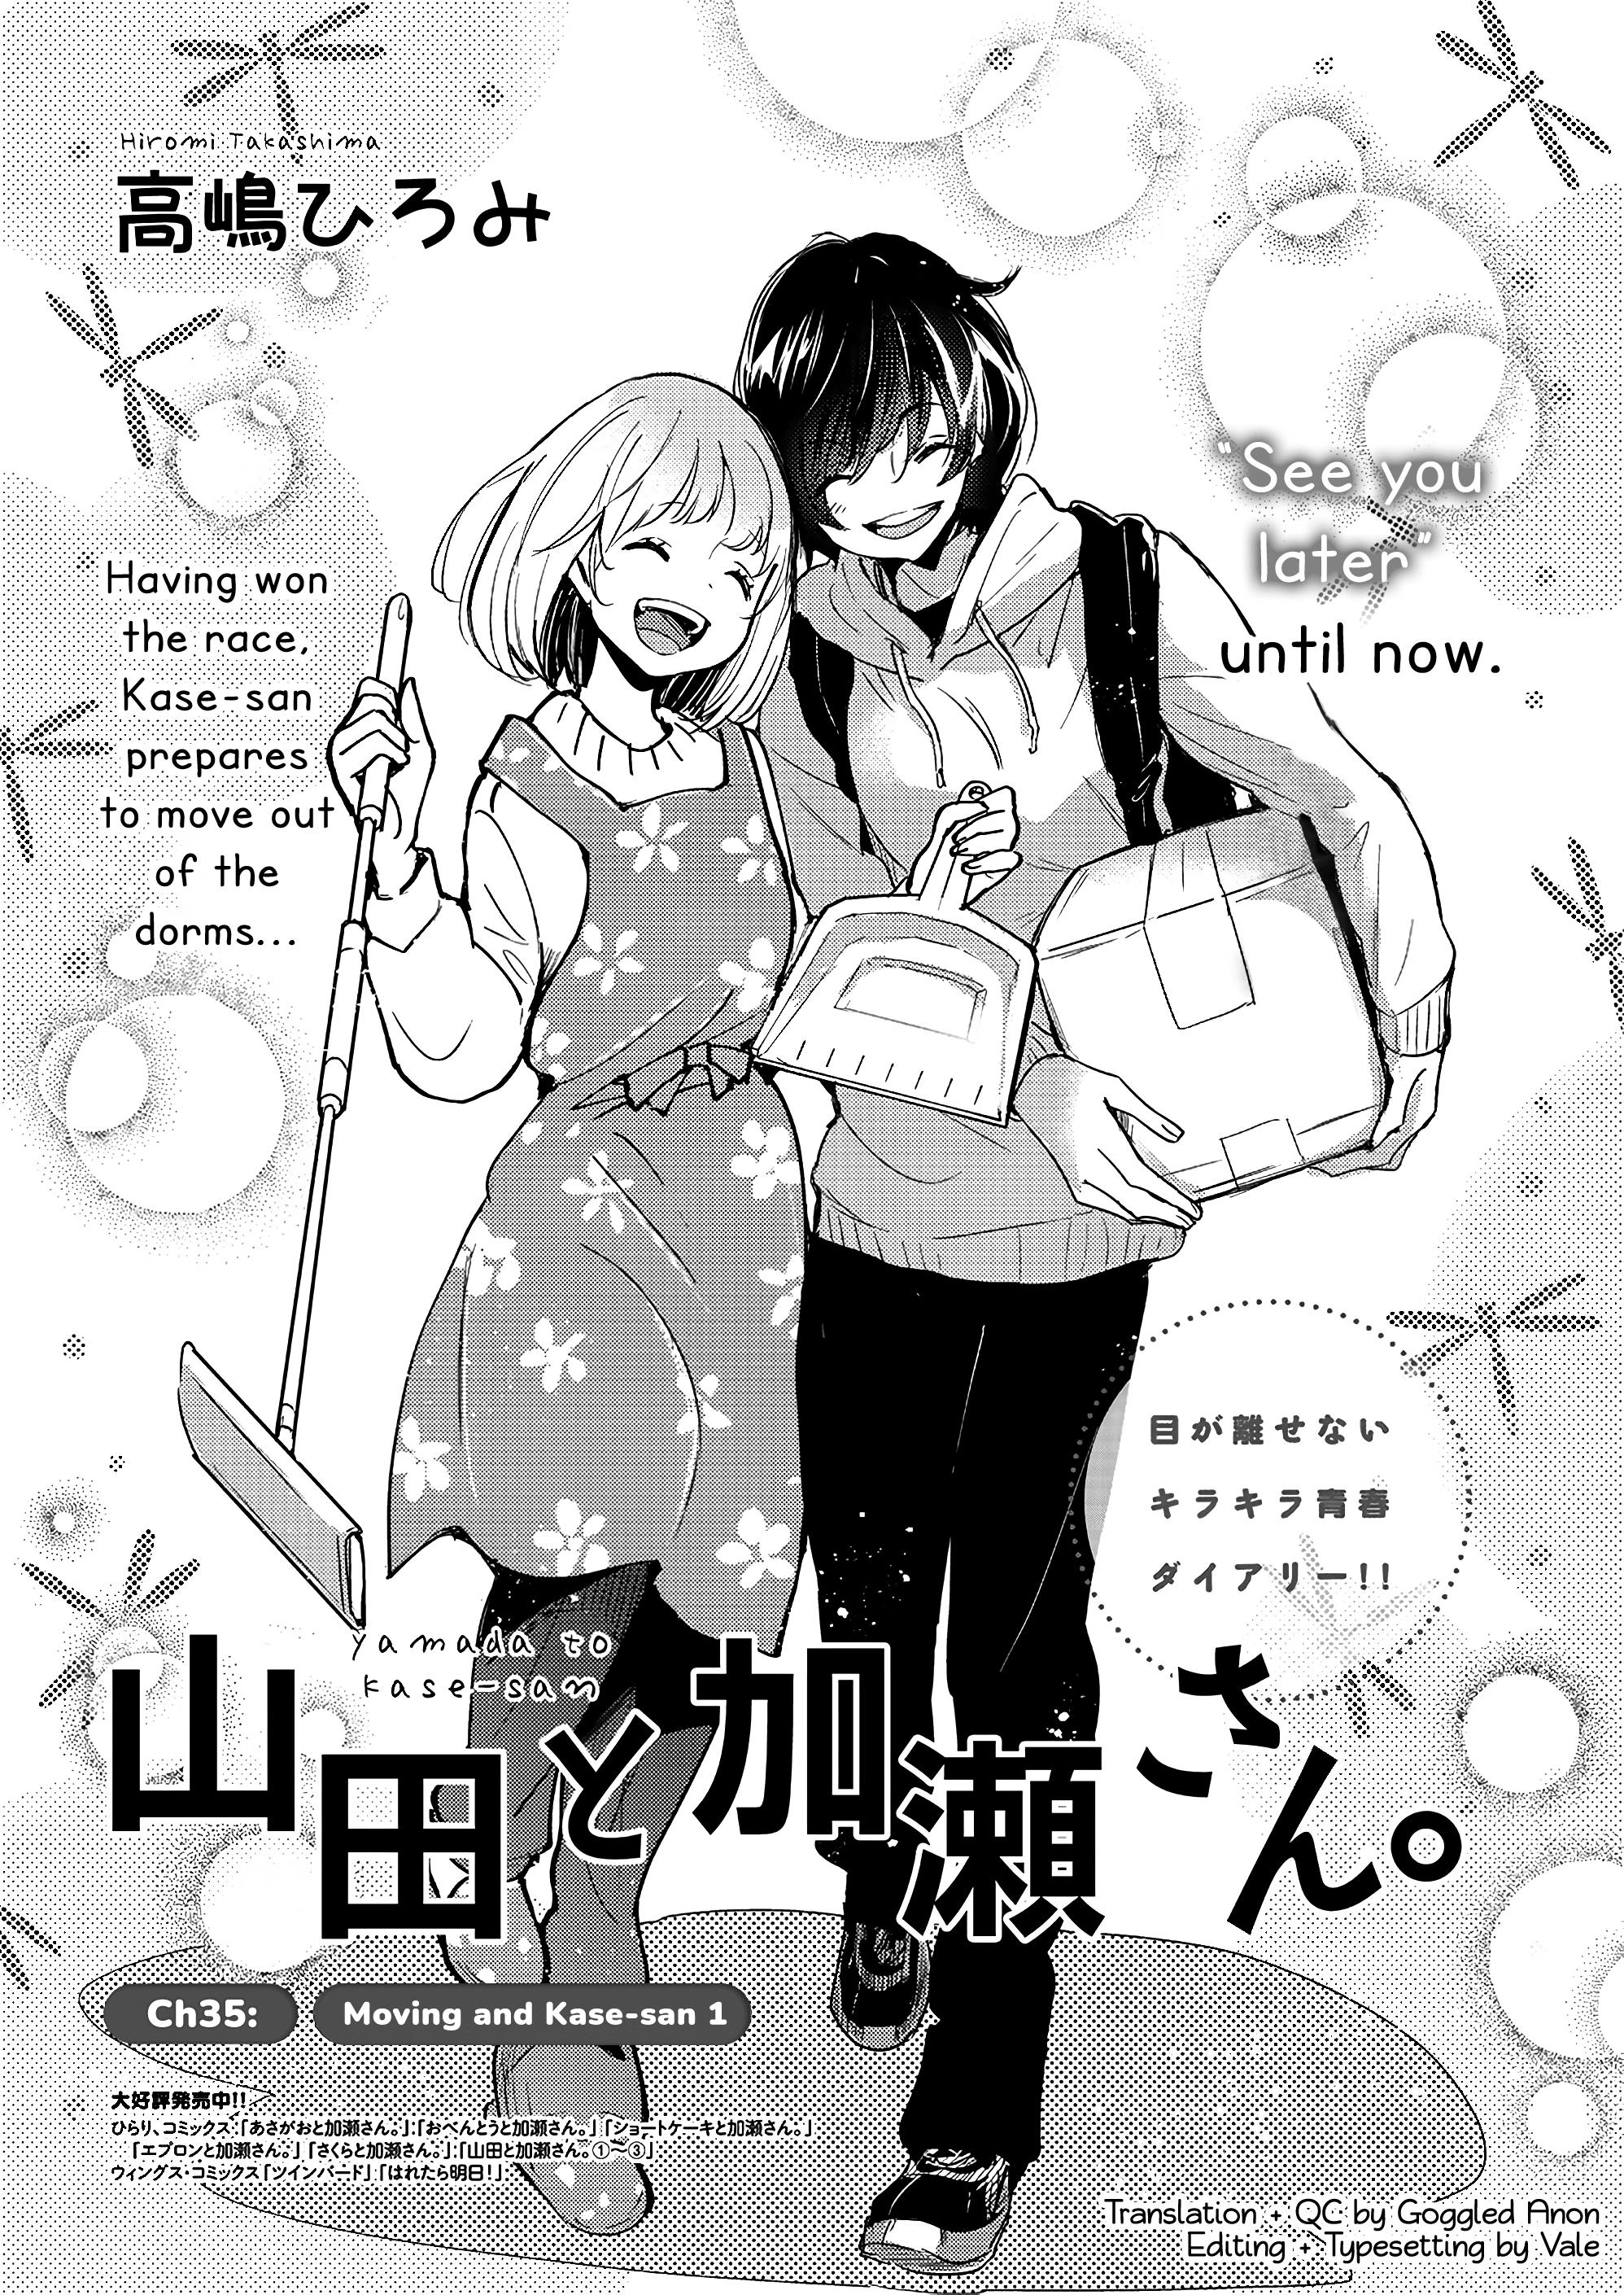 Yamada To Kase-San Chapter 35: Moving And Kase-San (Part 1) - Picture 2